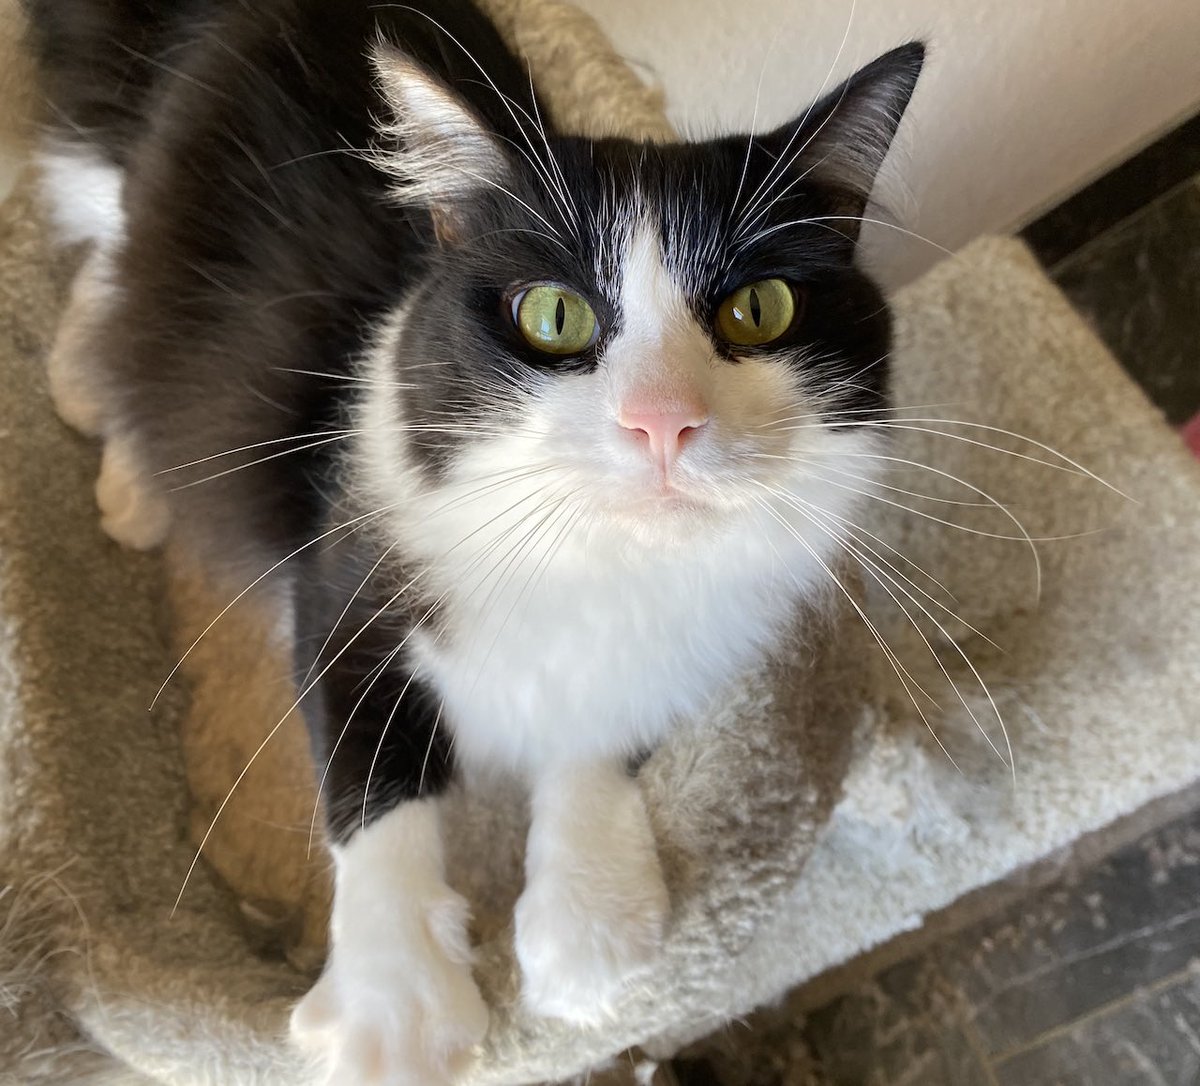 #WiskersWednesday James is horribly upset I missed posting his whiskers photo. Please accept this late entry. He is a FeLV+ kitty who rooms with his sister & brother along with Little Ms Gray, all of whom are FeLV+. Please give James a shout out for his wonderful whiskers.